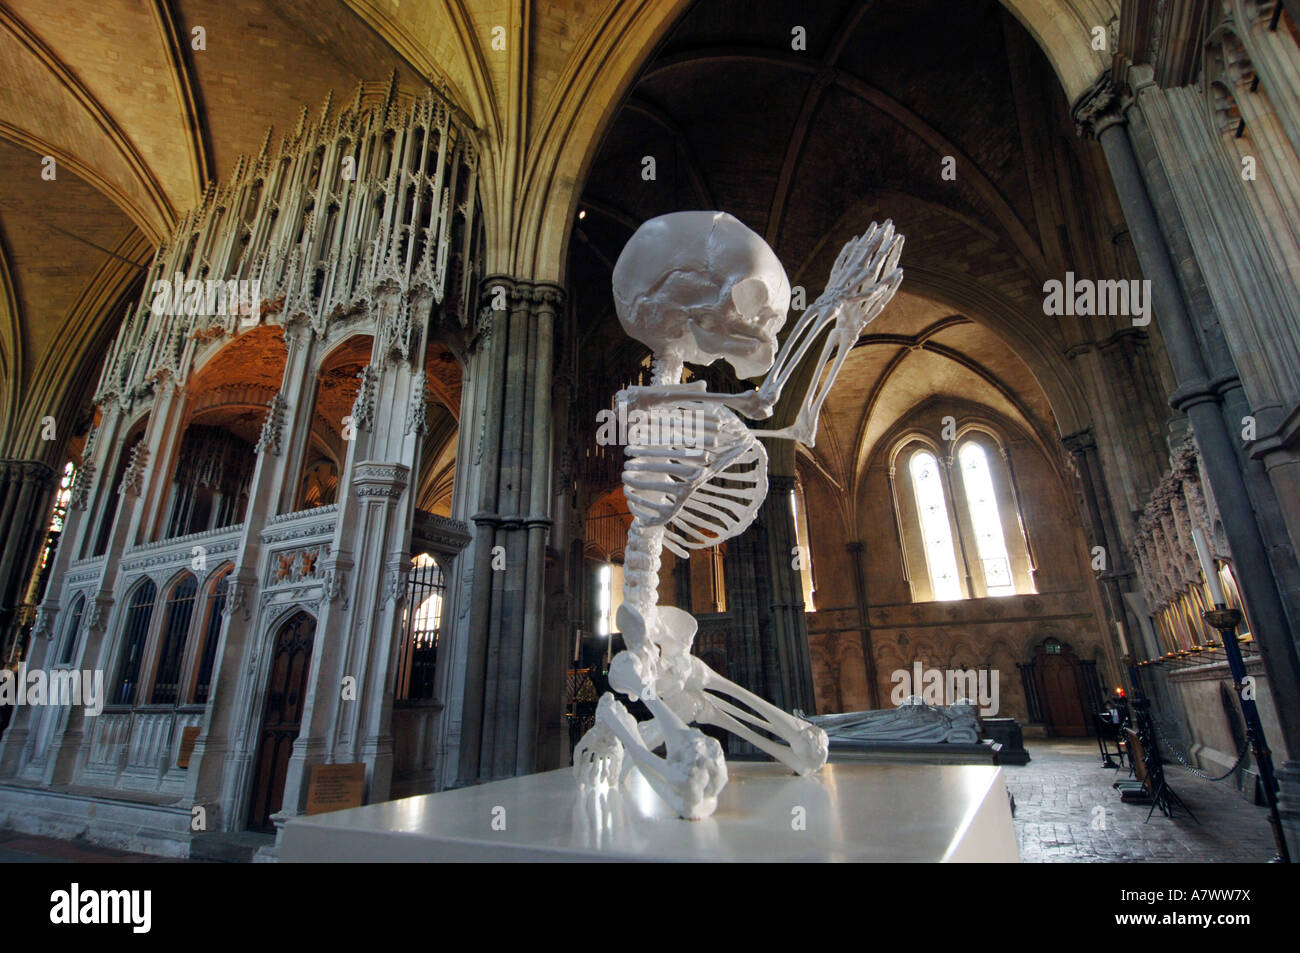 A sculpture of a foetal skeleton kneeling in prayer by Mark Quinn at Winchester Cathedral Stock Photo